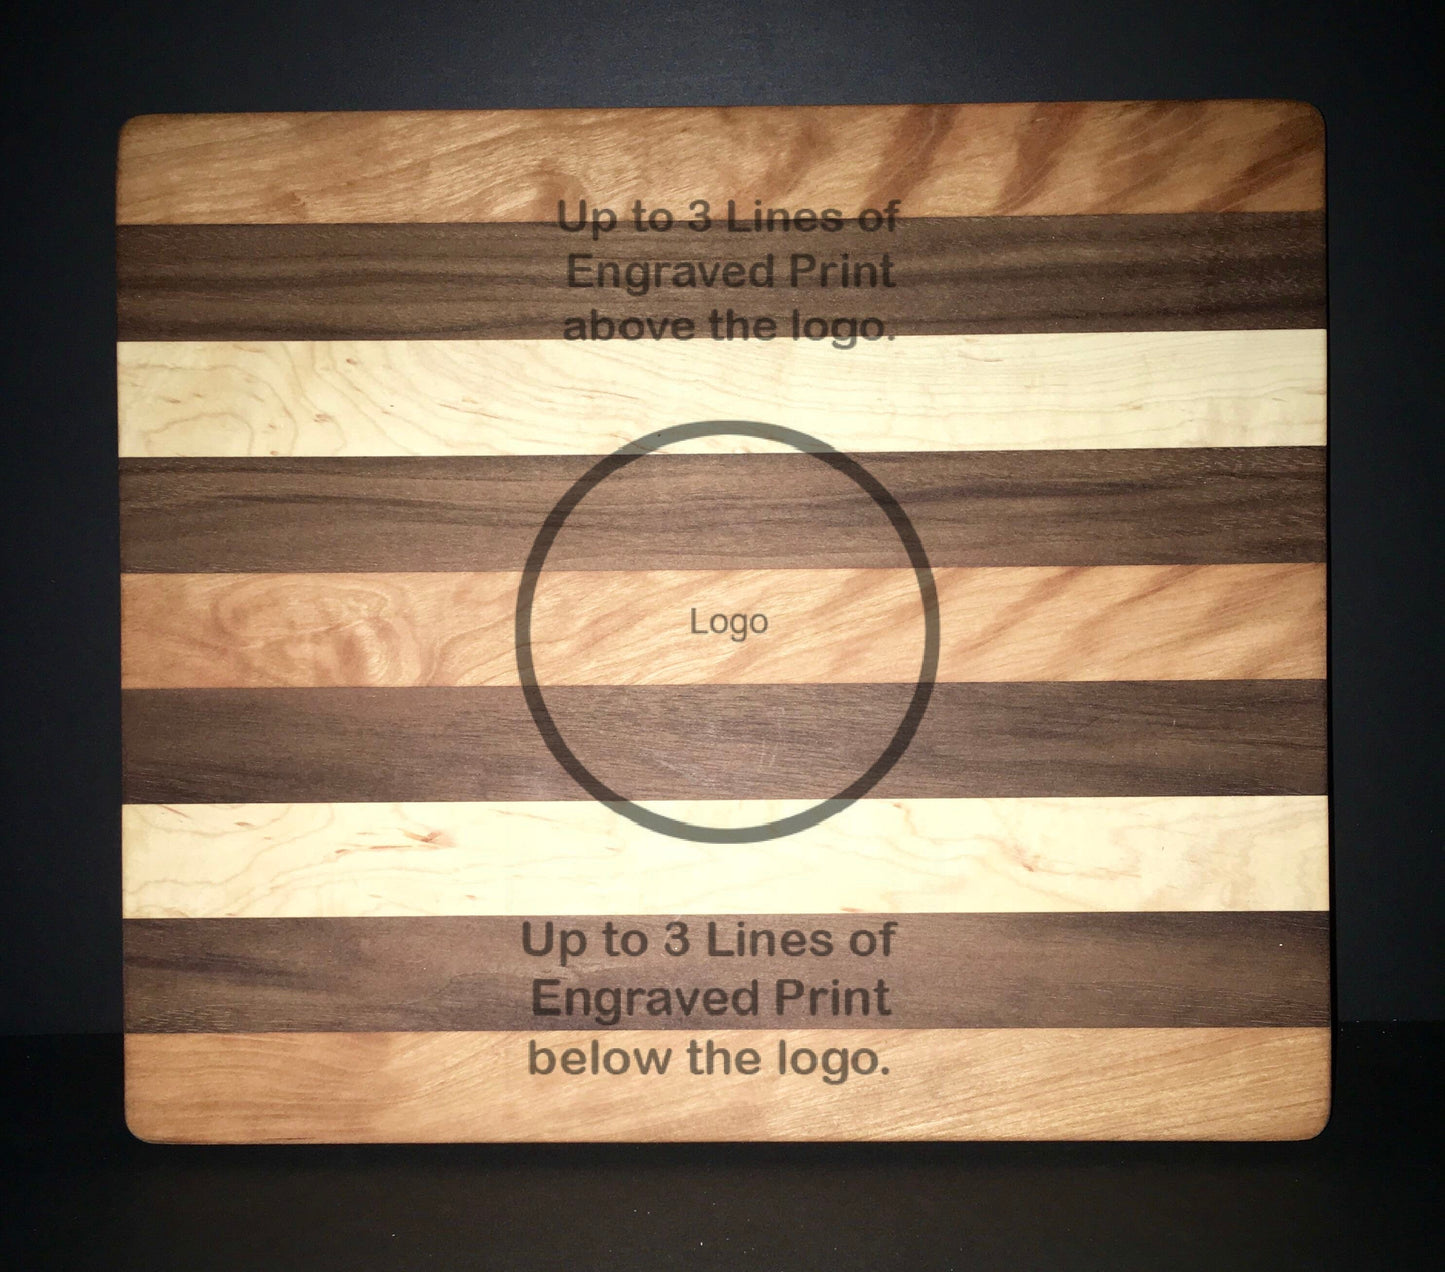 IAFF Officially Licensed 8”X10” Cuttingboards Made Out Of Cherry, Black Walnut, and Maple (7X9 & 12”X14” Also Available)